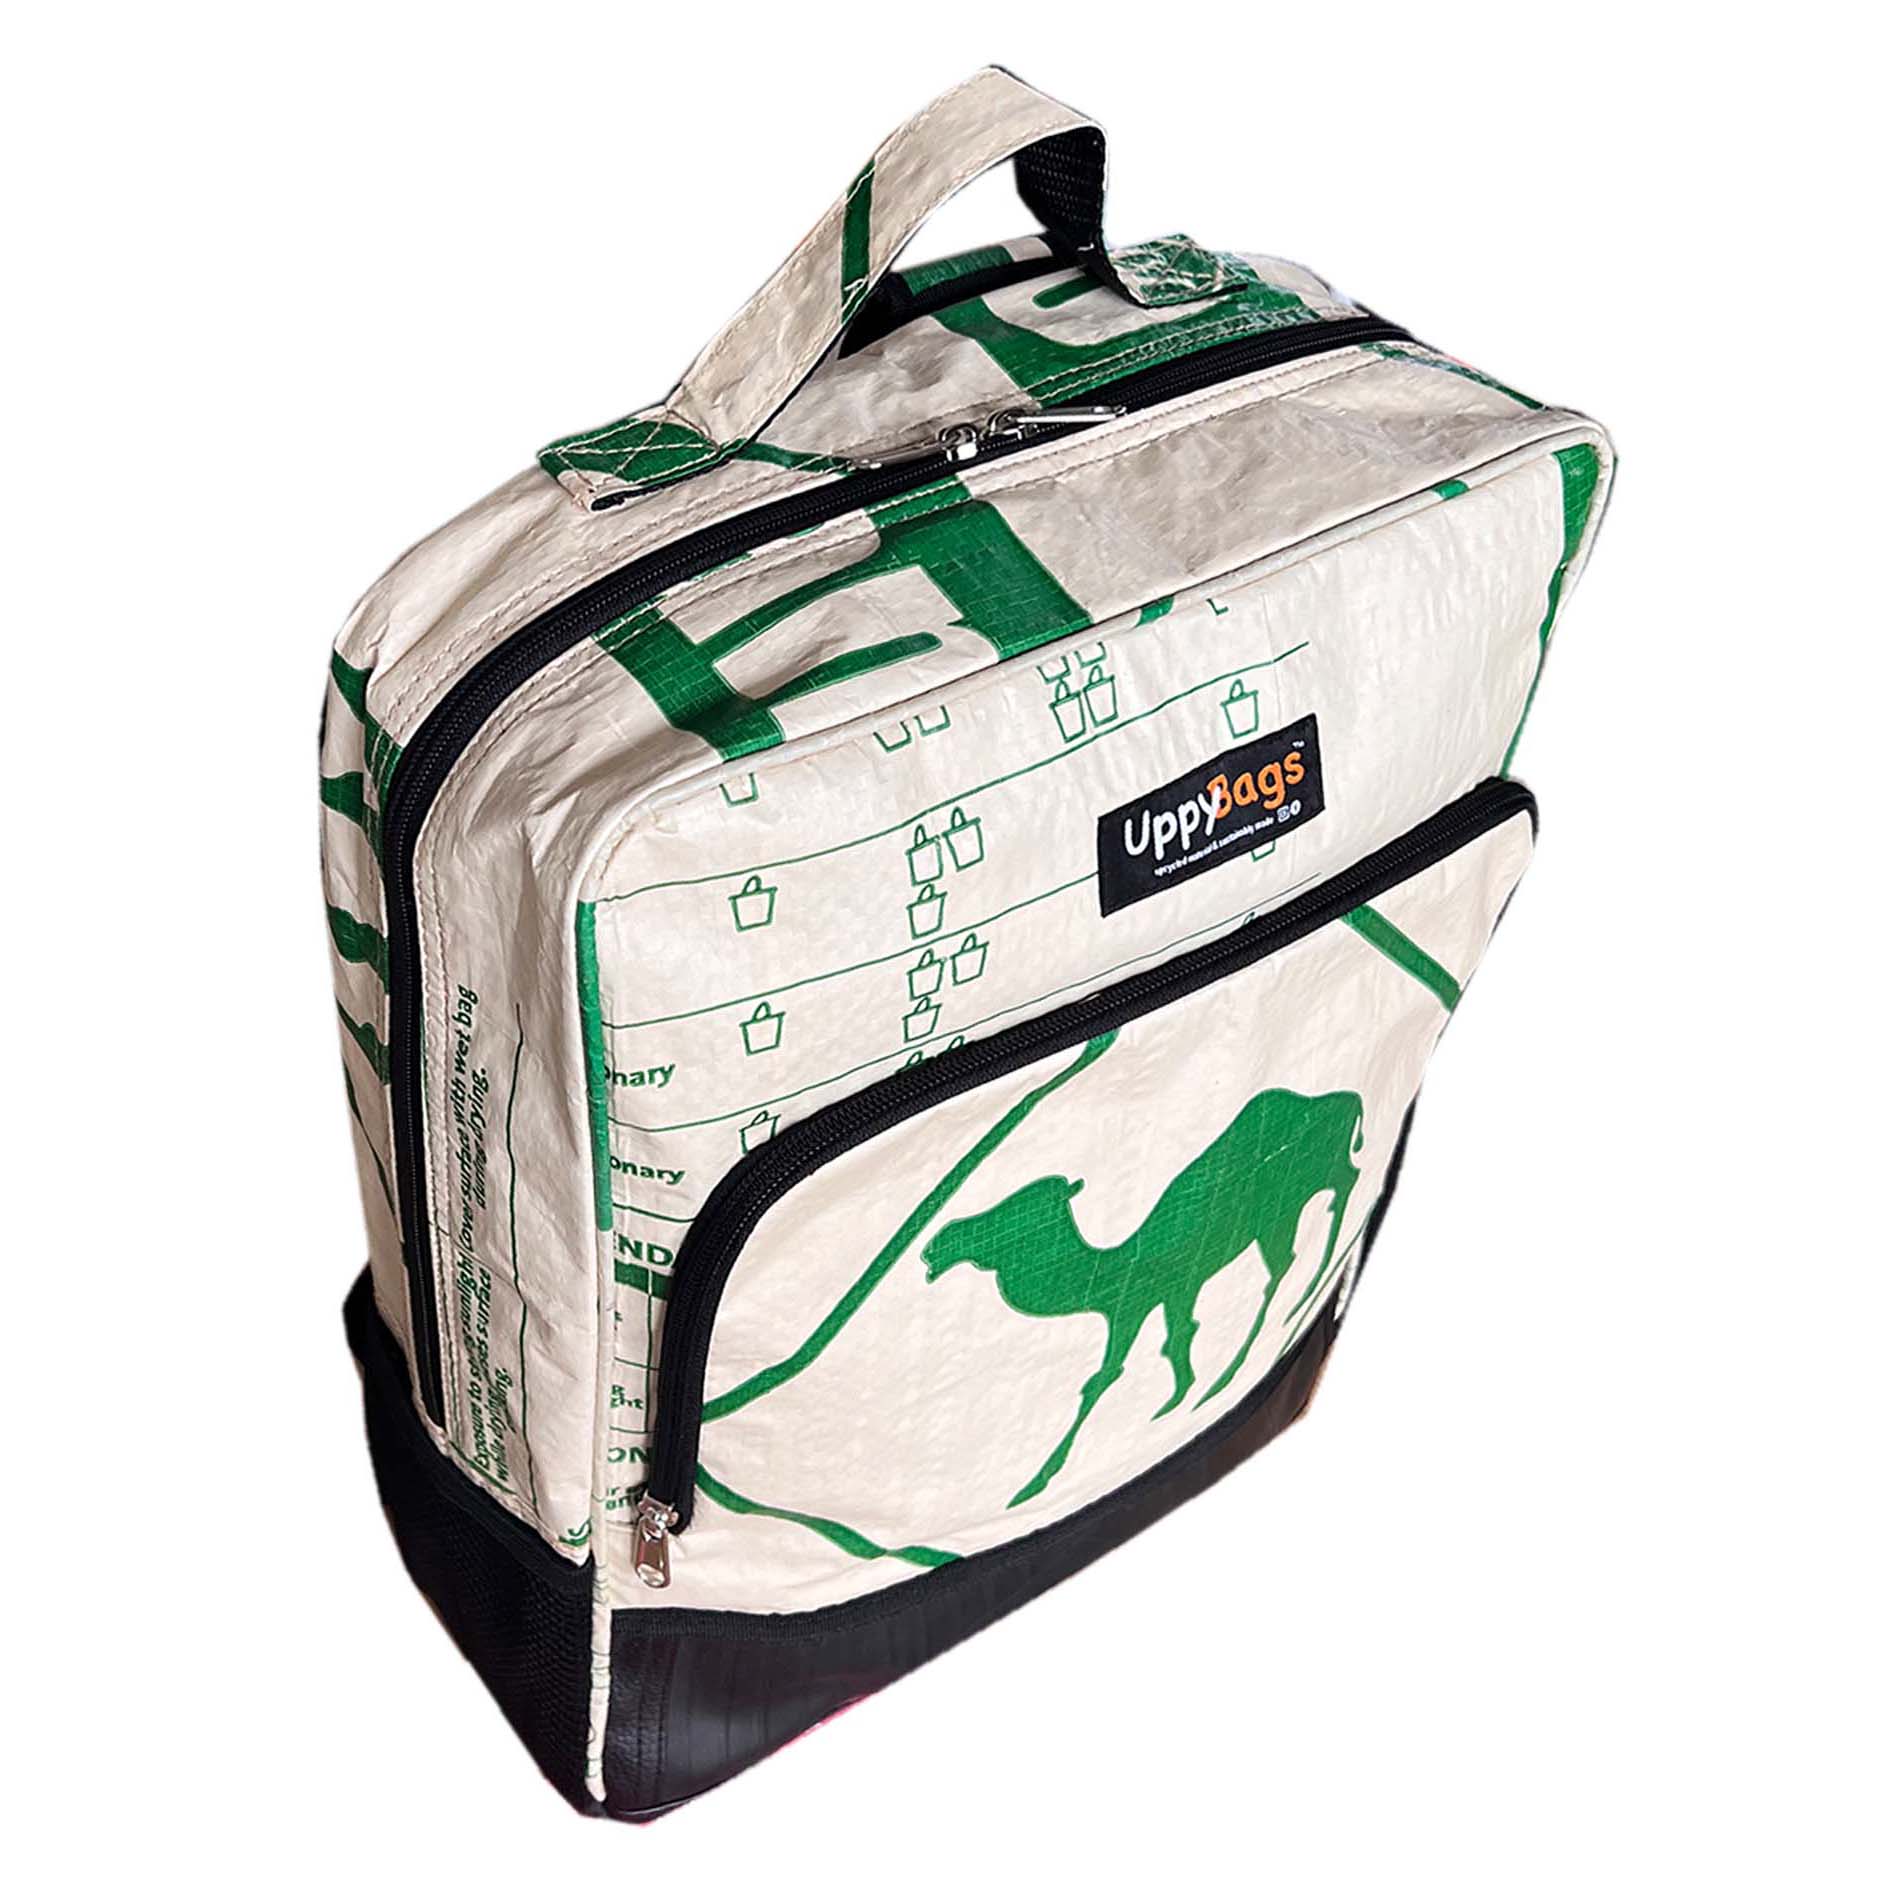 Recycled backpack UK, ethical bags UK, recycled material backpack with animal print. Laptop backpack, work backpack made of recycled material with elephant and green camel print UppyBags  